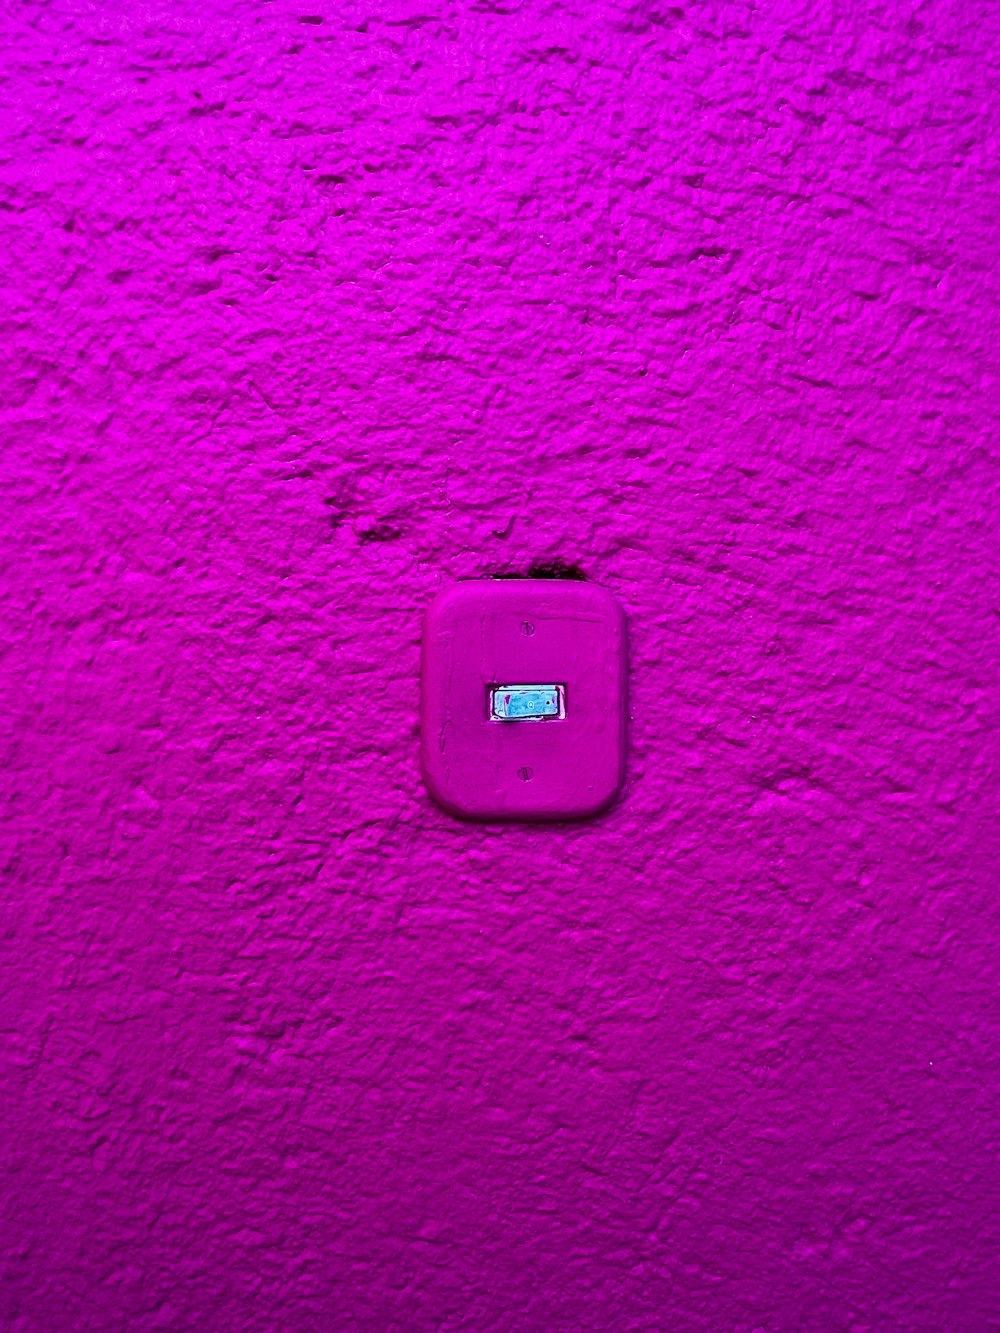 a pink wall with a square button on it